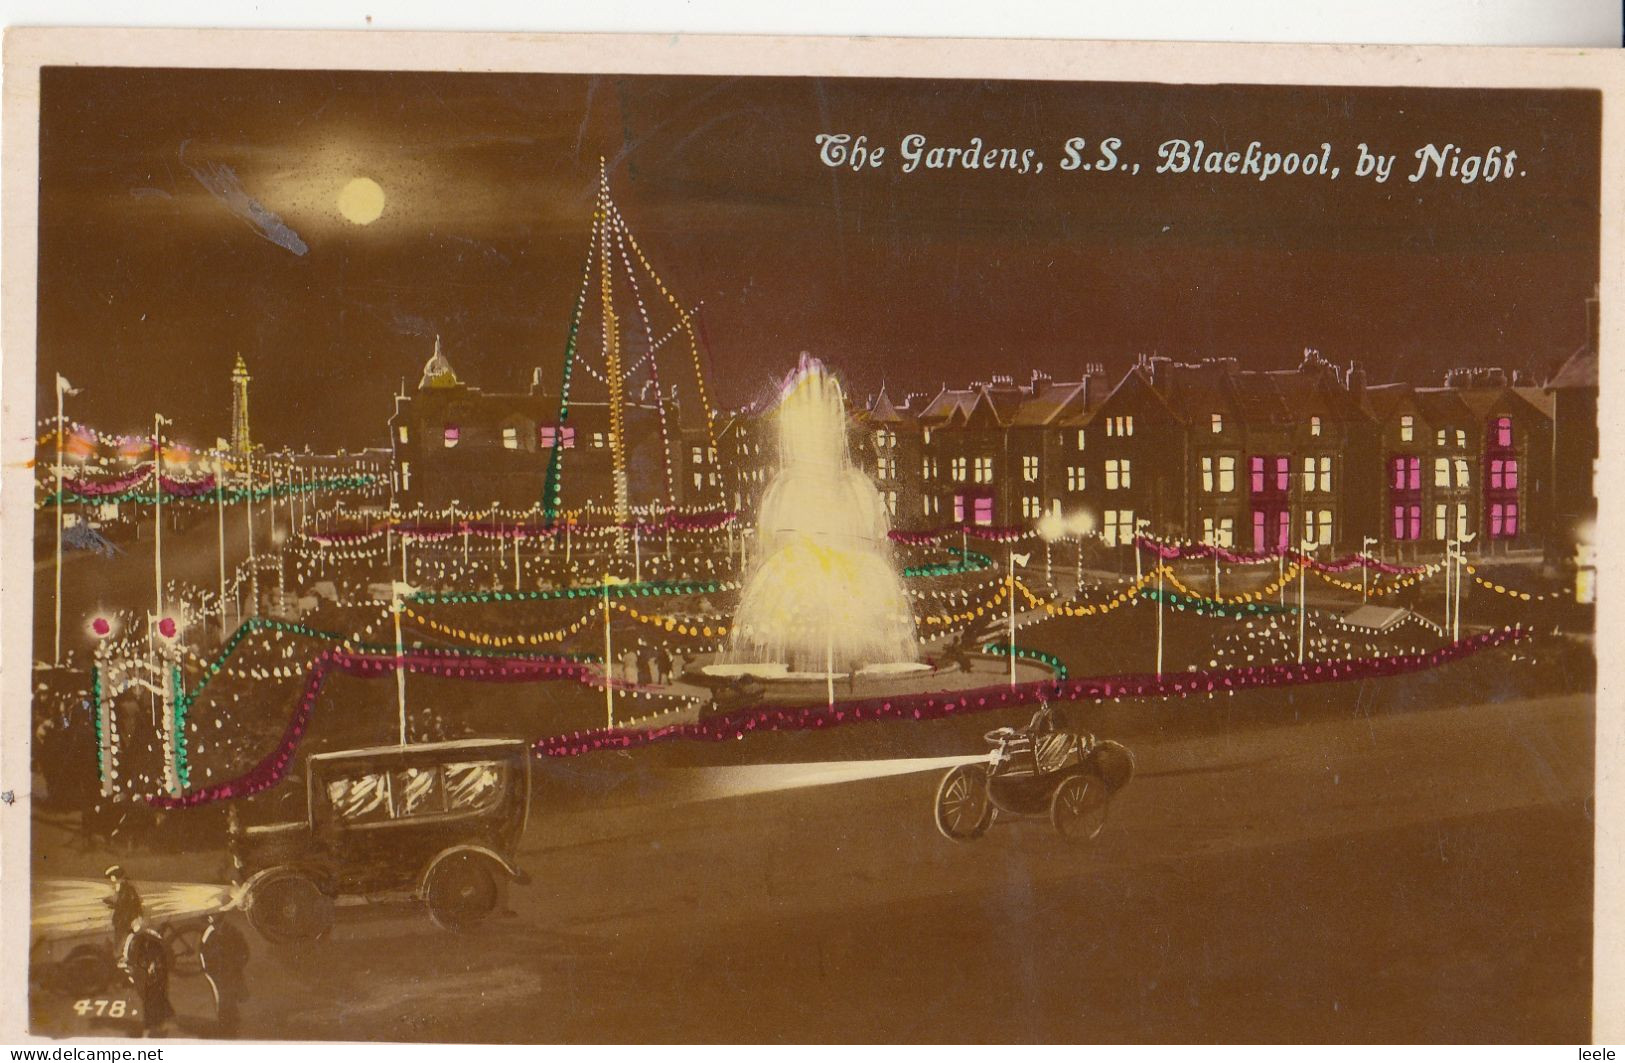 CK56. Vintage Postcard. The Gardens, S.S. Blackpool By Night. - Blackpool